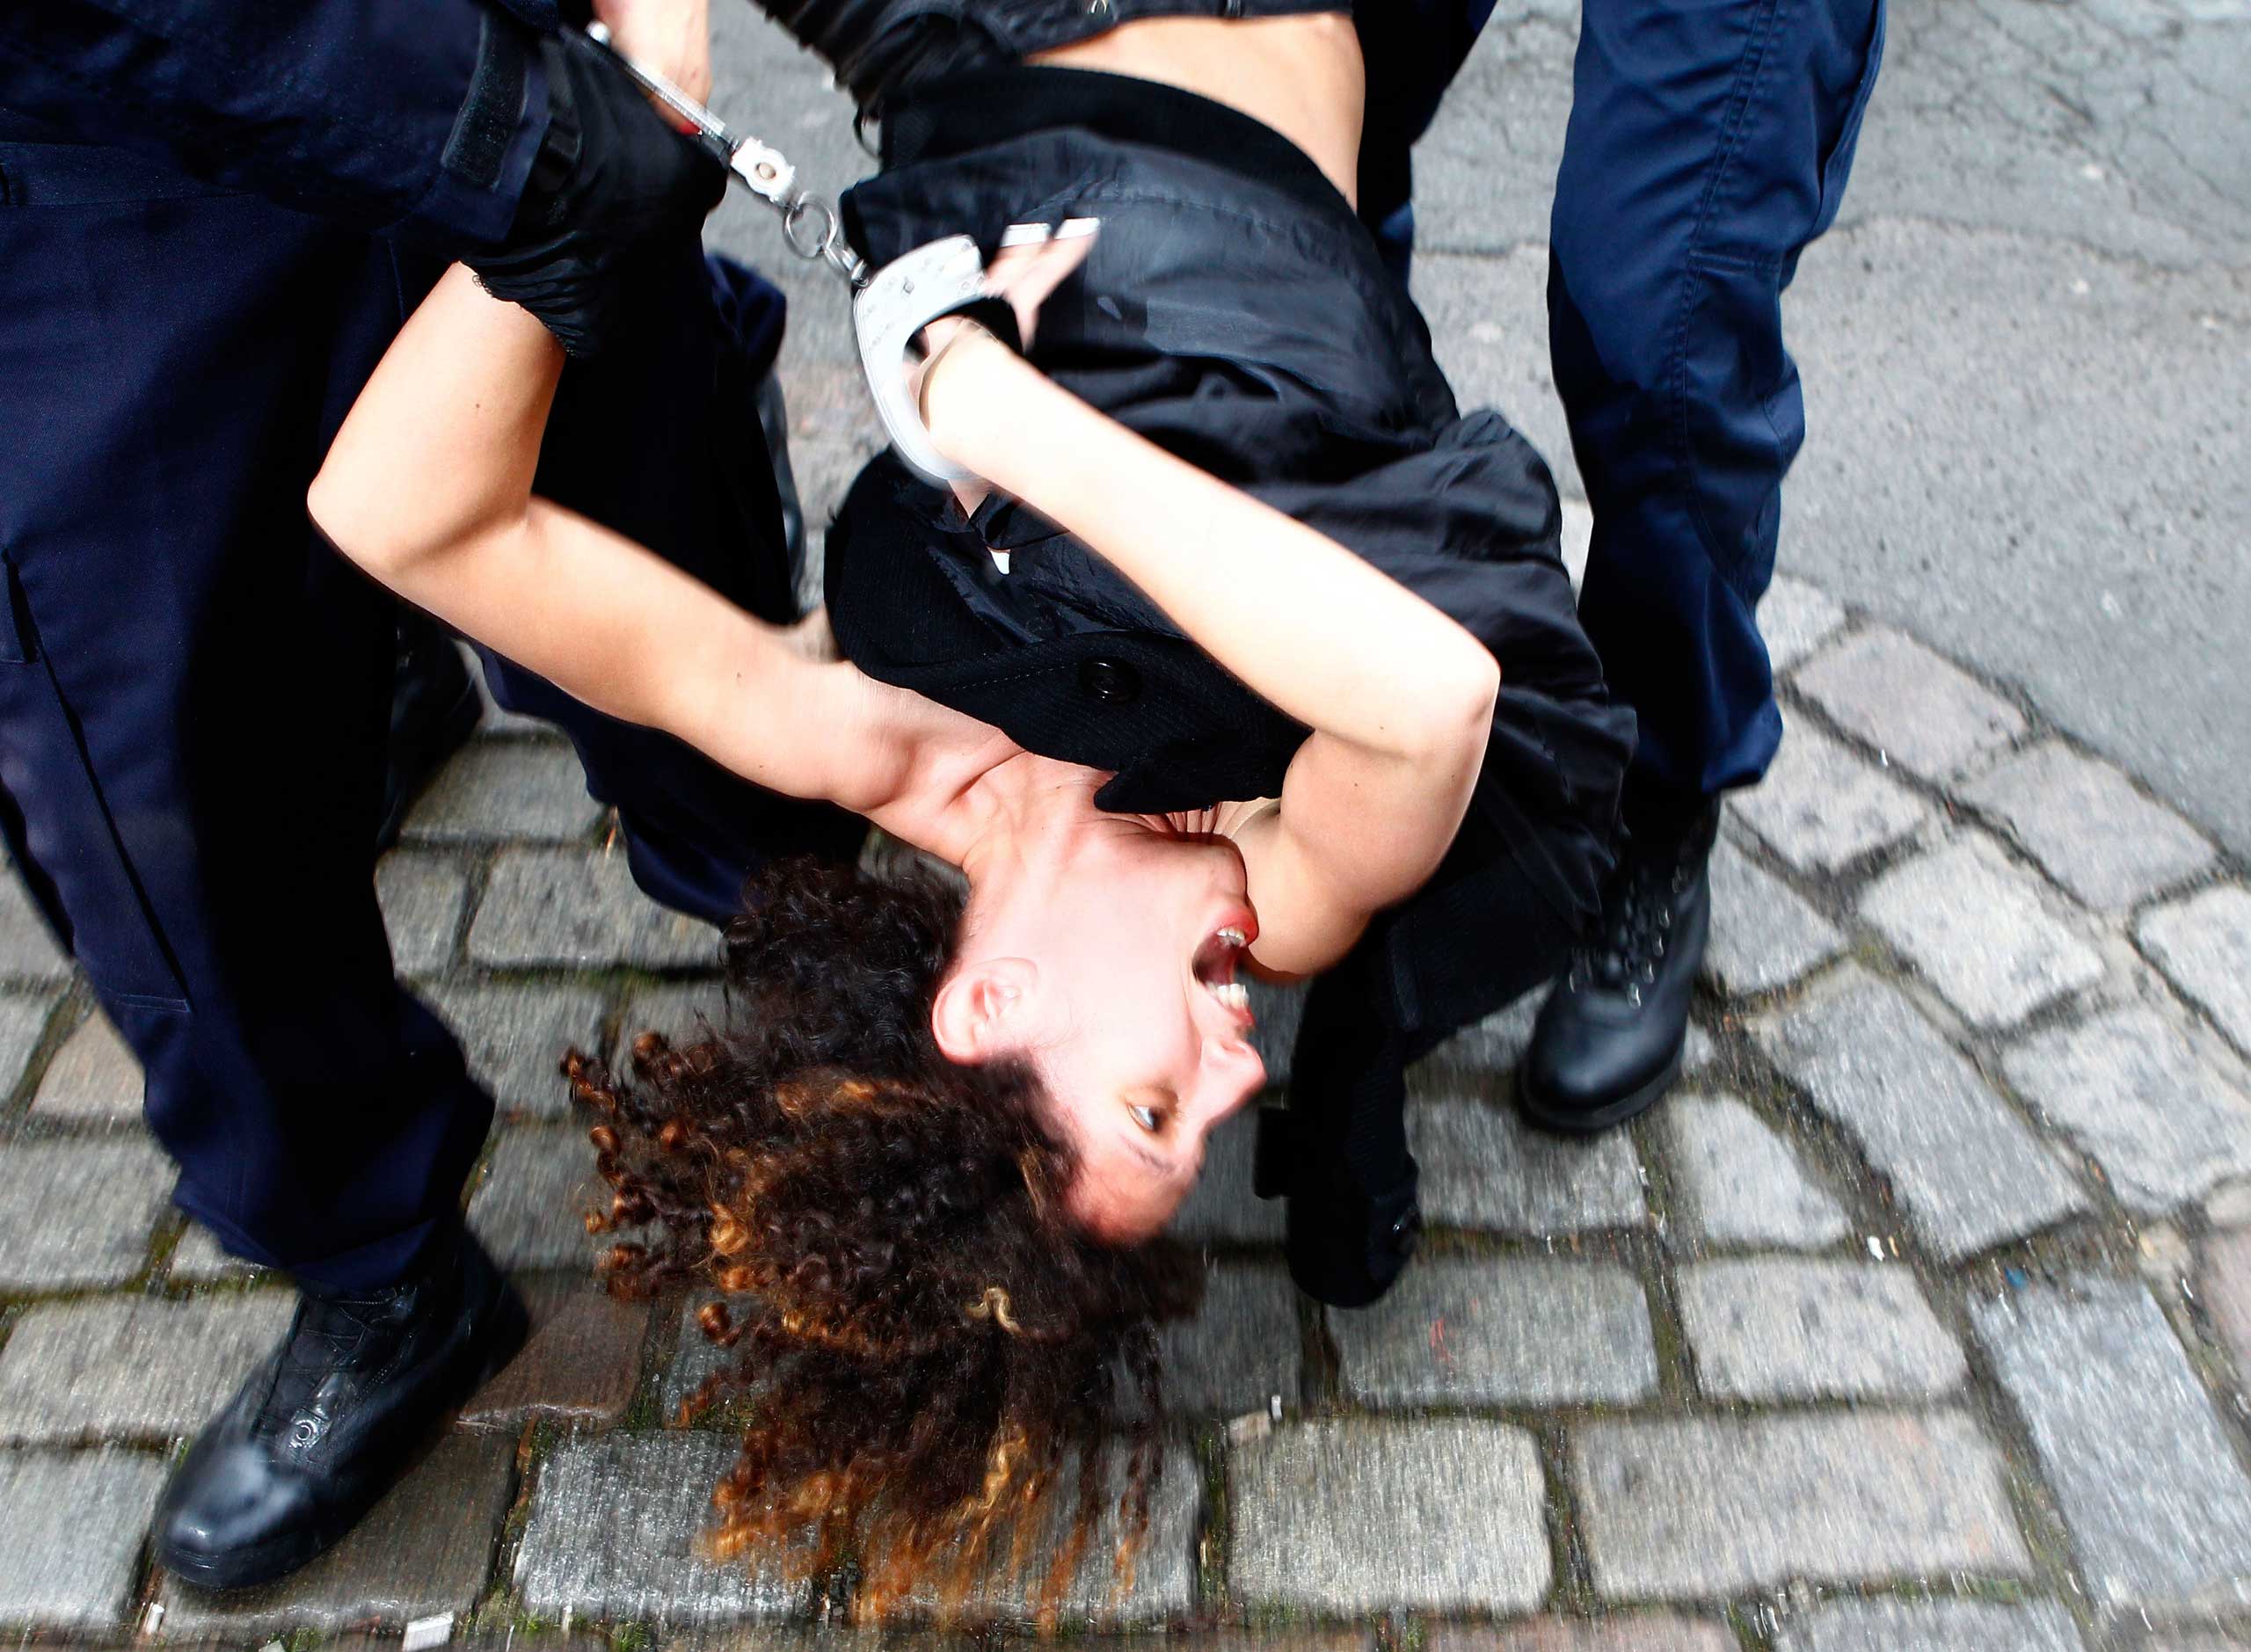 Feb. 10, 2015. A Femen activist is taken away by police officers as she protests in front of the Lille courthouse in Lille, northern France, where Dominique Strauss-Kahn goes on trial for sex charges in France. The former head of the International Monetary Fund, whose career went down amid accusations of sexually assaulting a hotel maid in New York, is facing similarly charges in France for aggravated pimping and involvement in a prostitution ring operating out of luxury hotels.